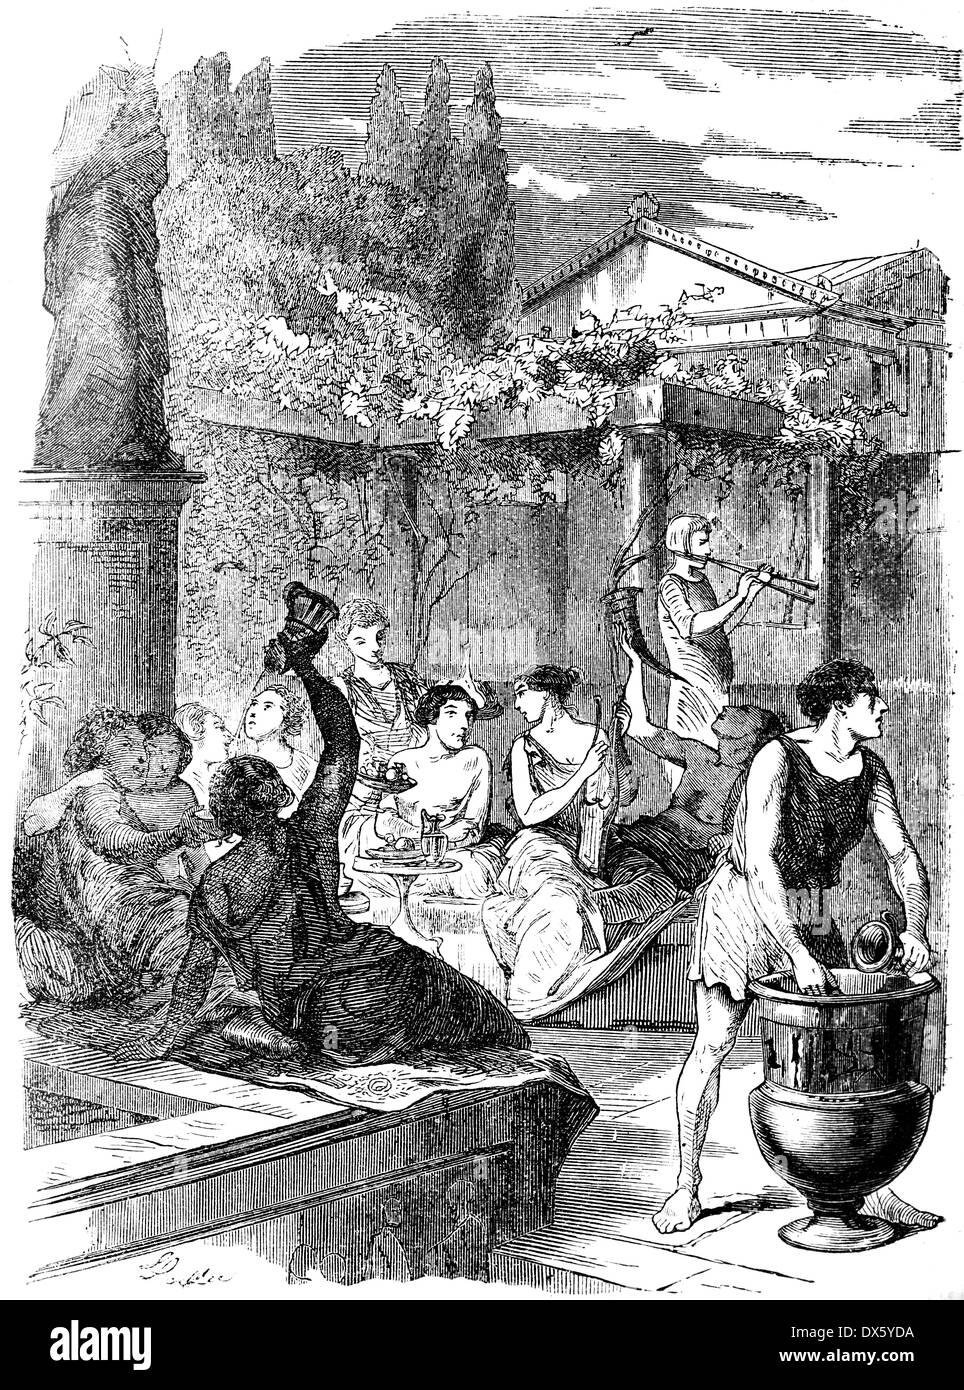 Feast scene, illustration from book dated 1878 Stock Photo